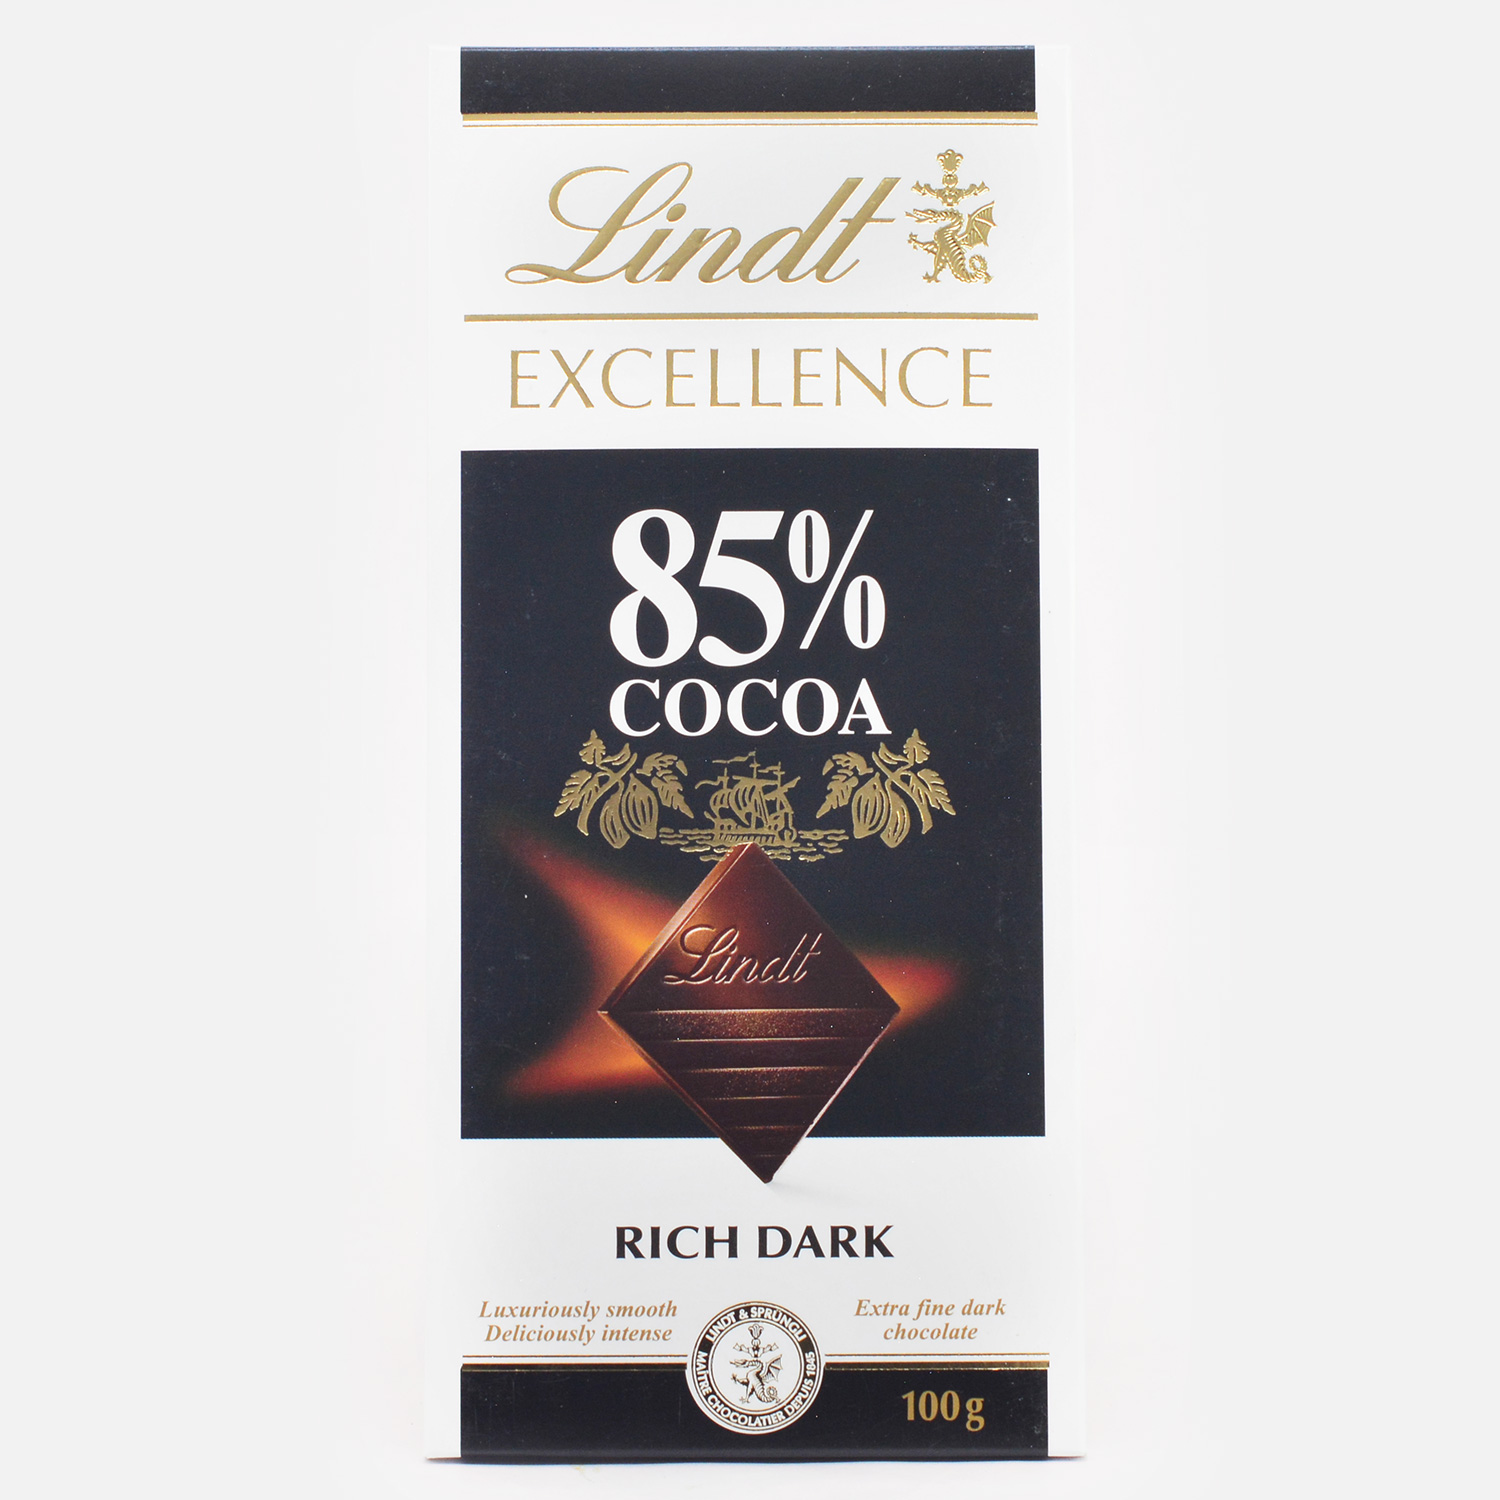 Rich Dark 85% Cocoa Chocolate by Lindt